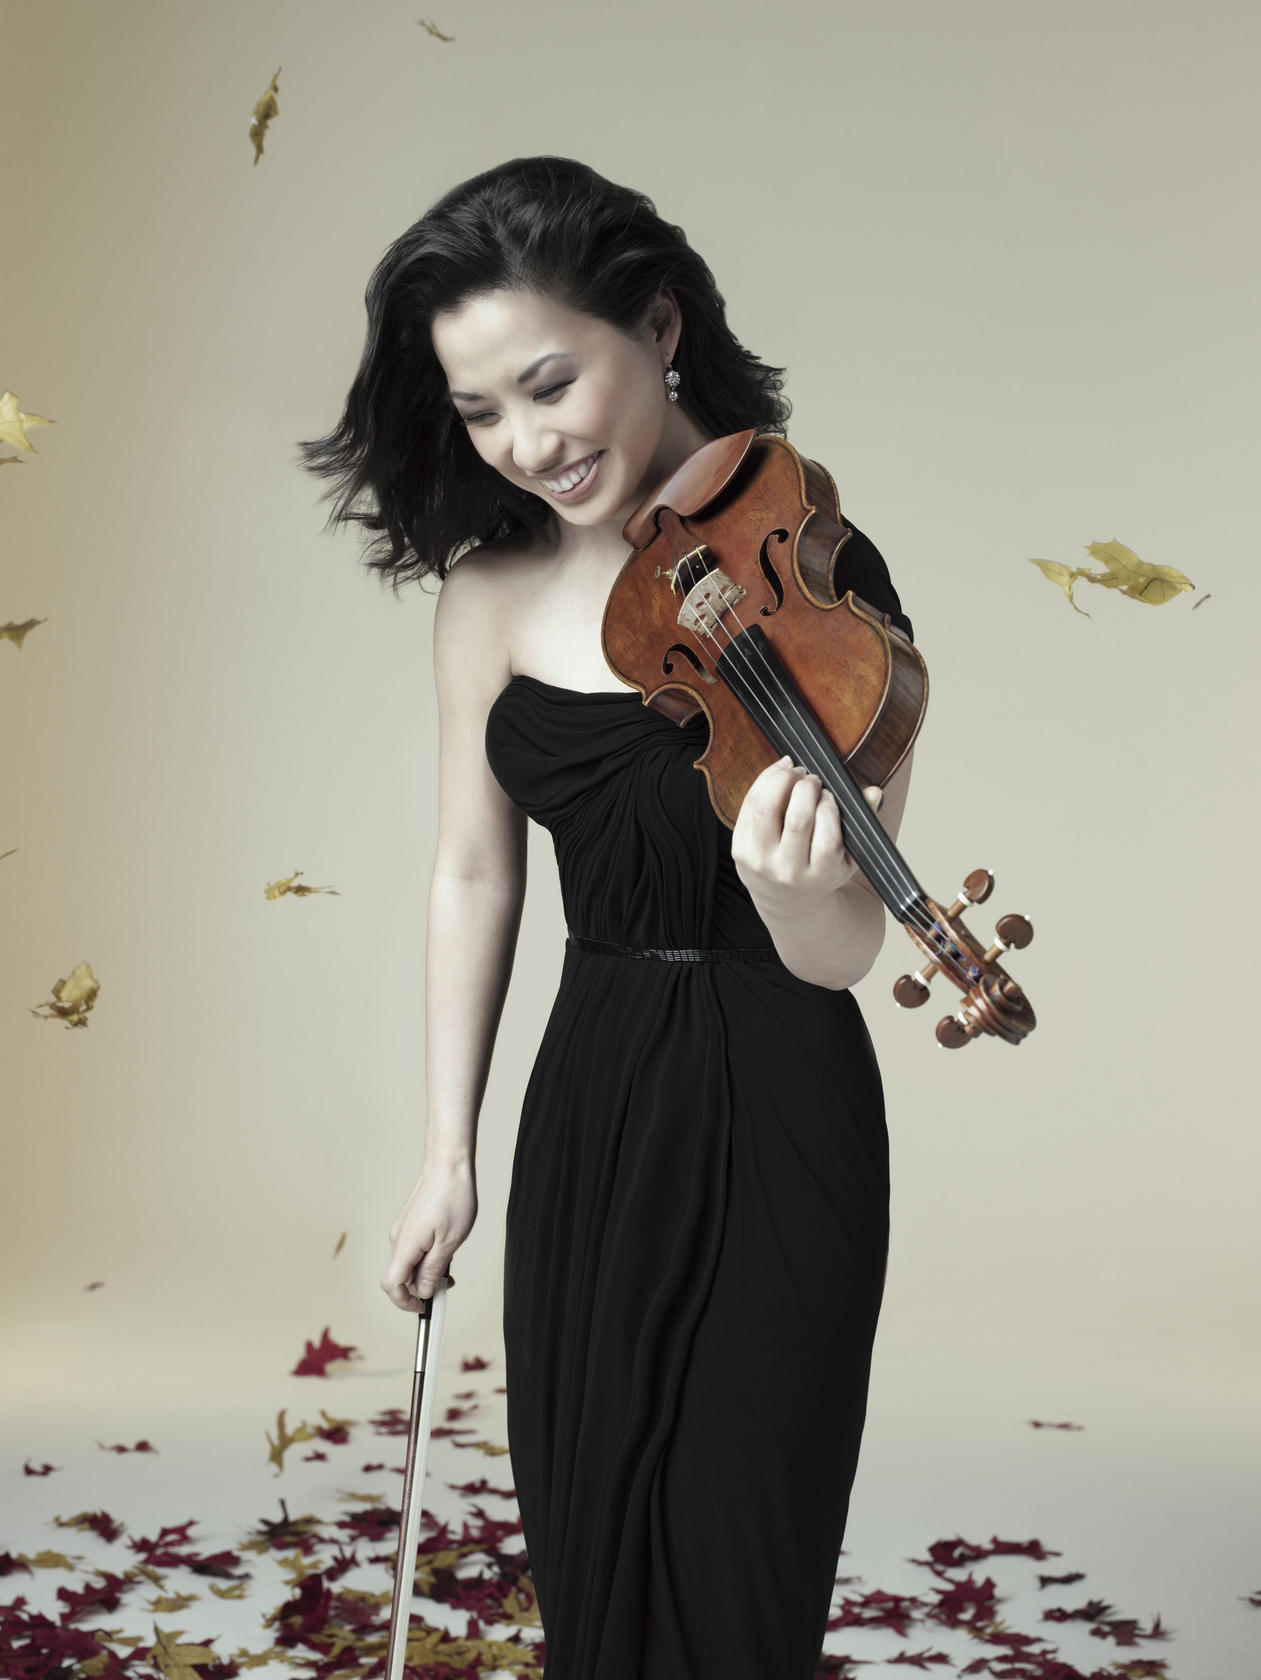 Sarah Chang plays with the City Chamber Orchestra of Hong Kong on April 4. Photo: Colin Bell